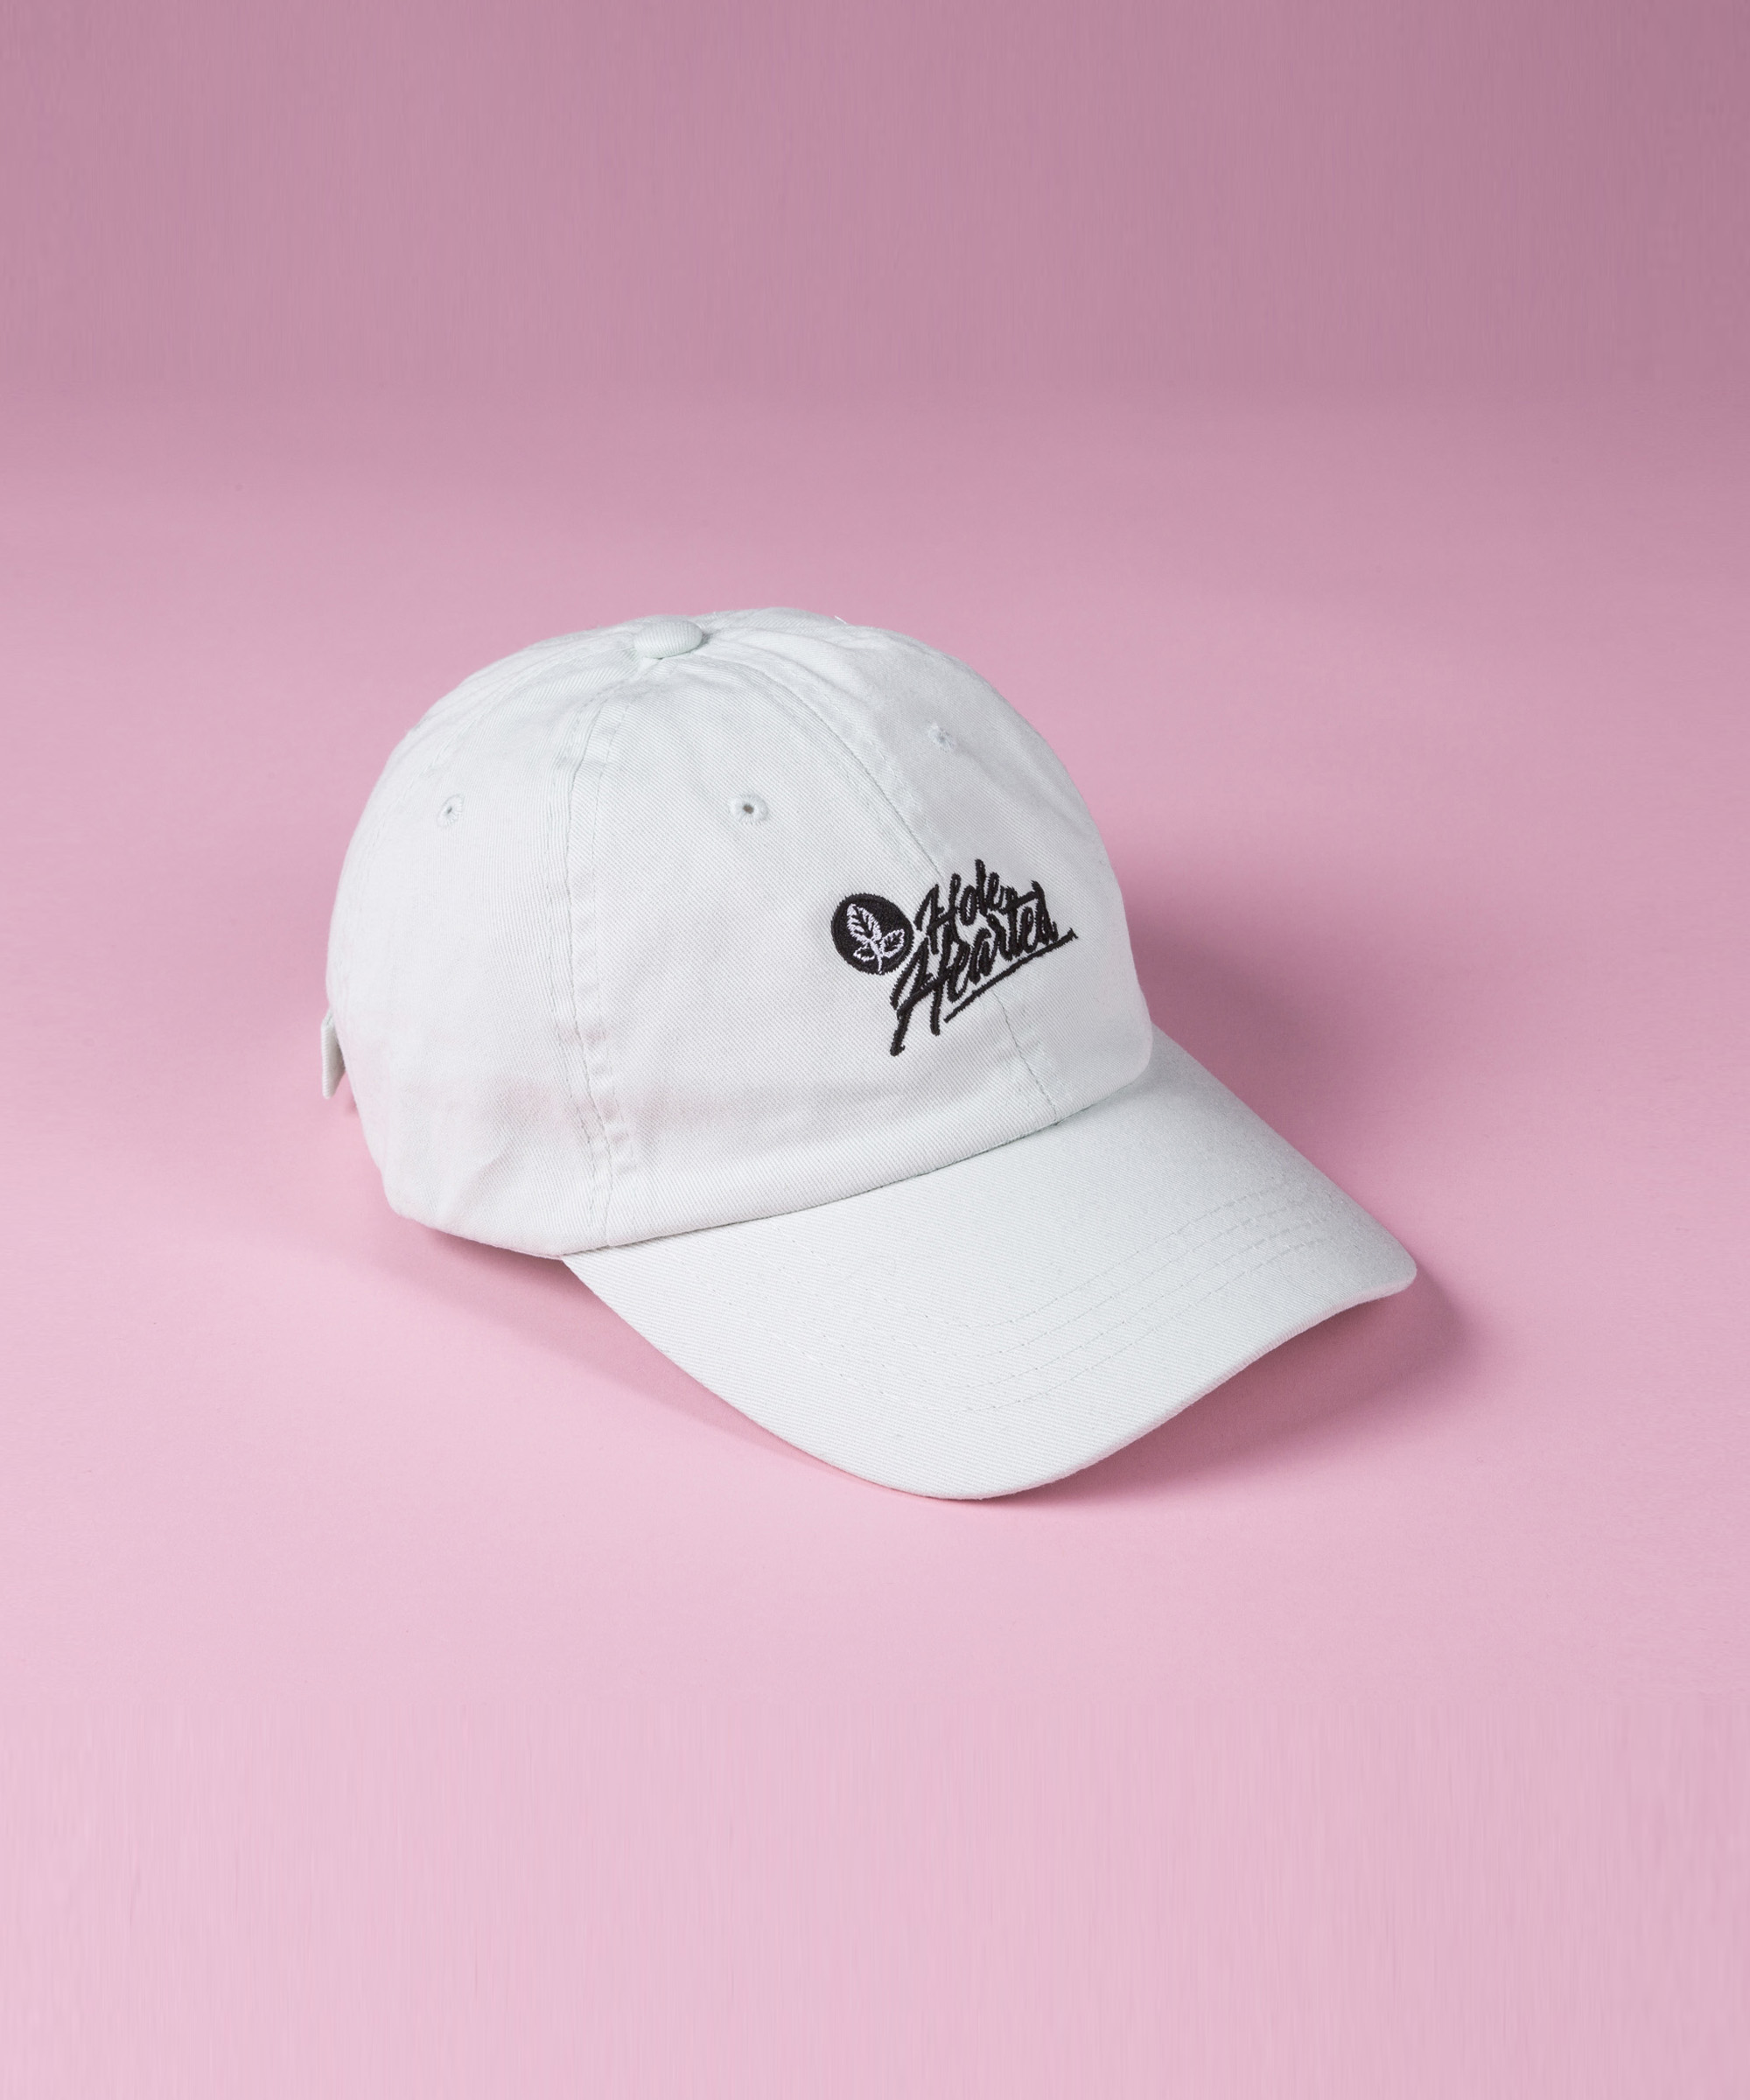 Staple Dad Cap // Mint Green - Hole Hearted Clothing